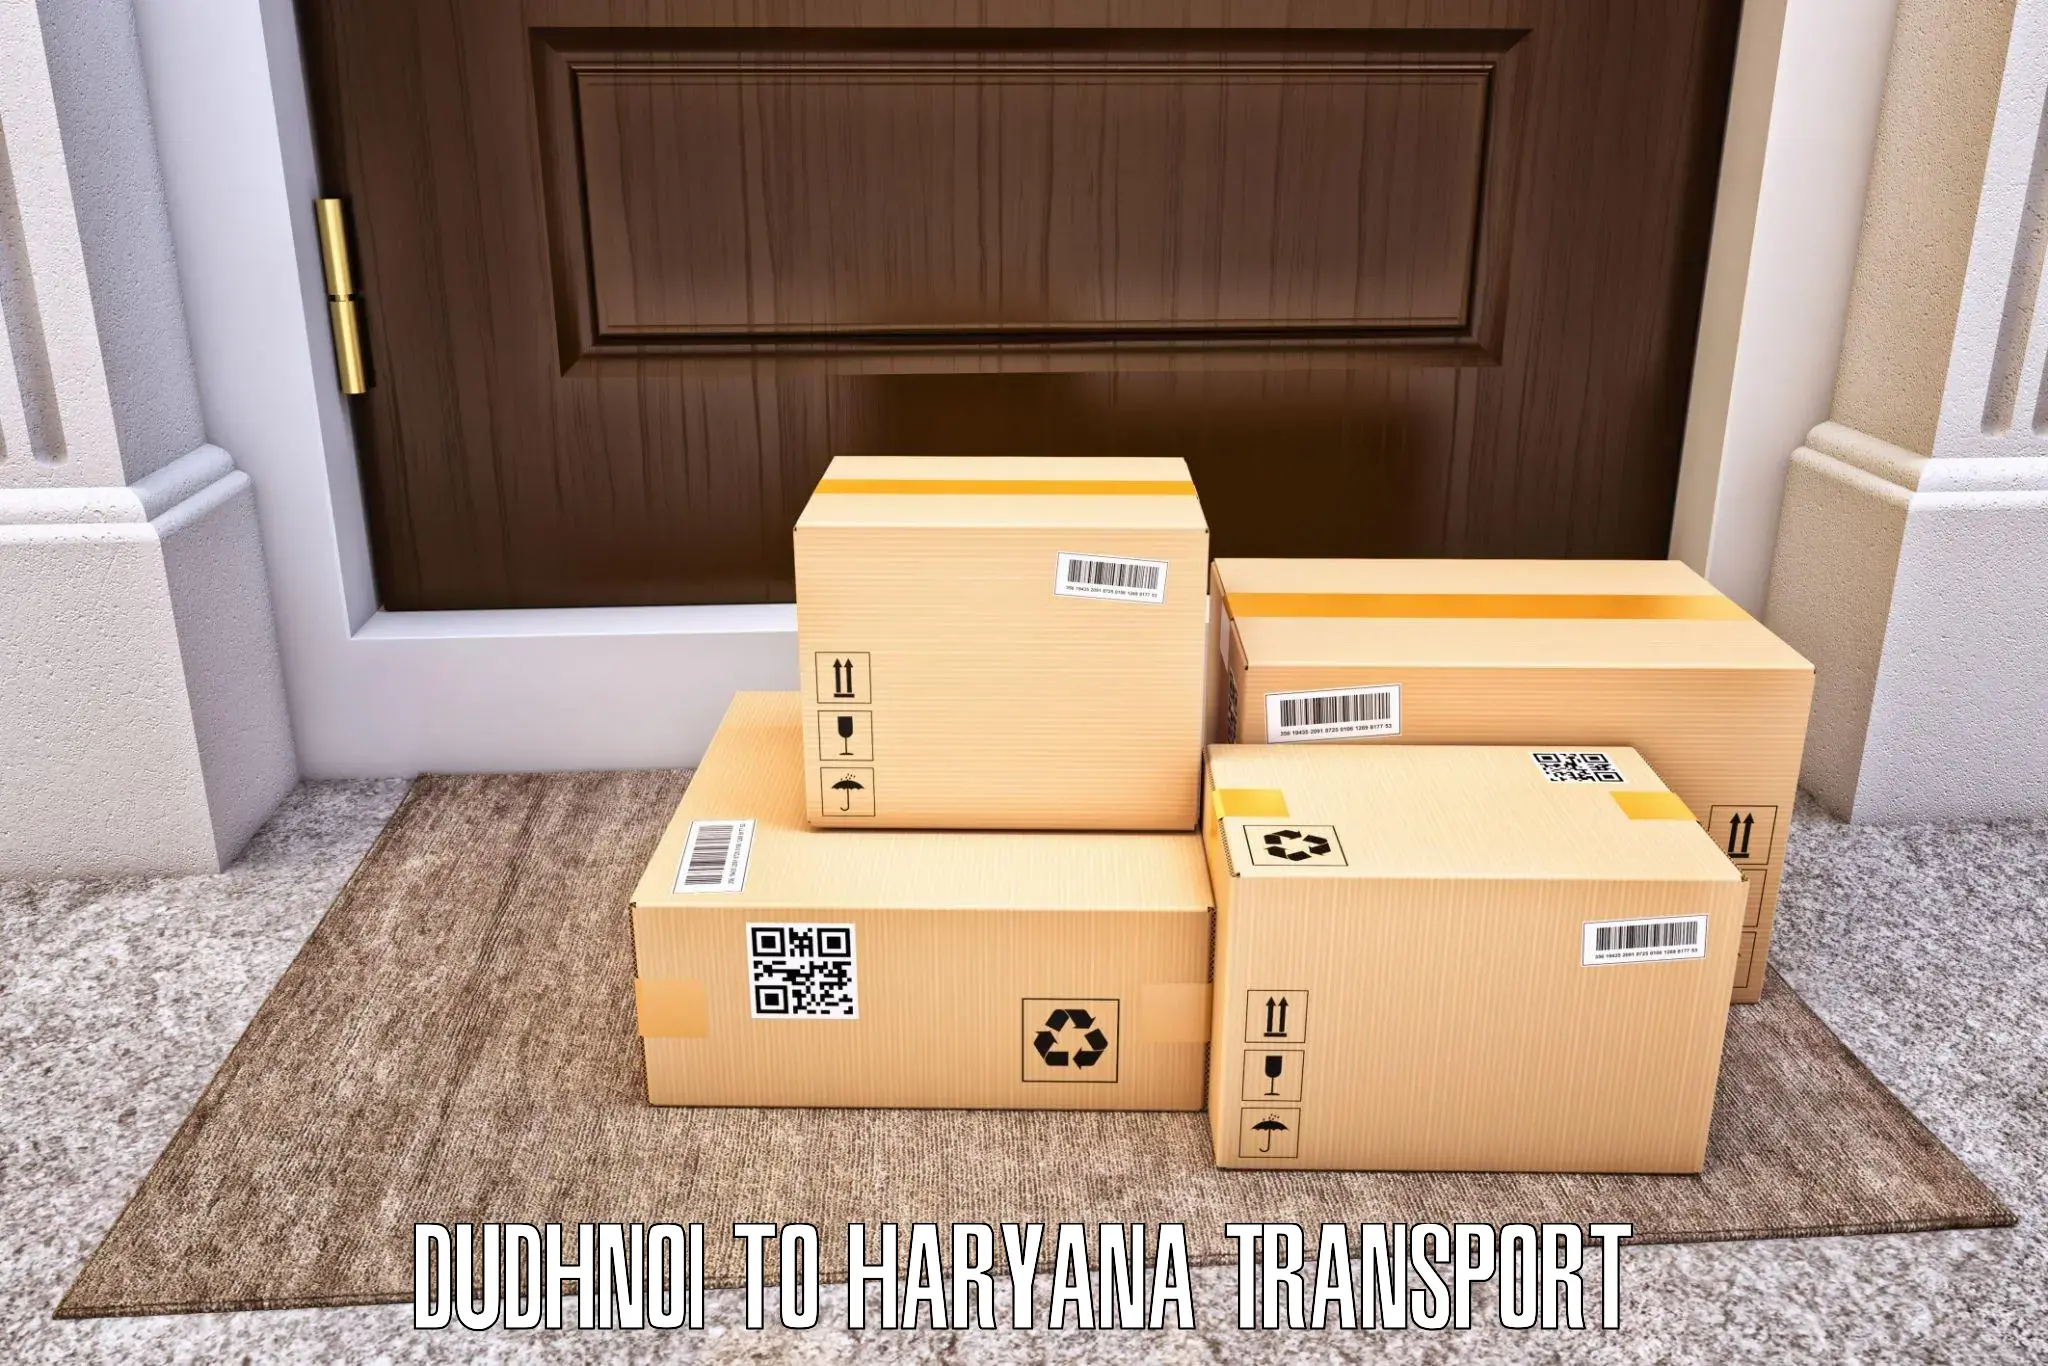 Commercial transport service Dudhnoi to Haryana